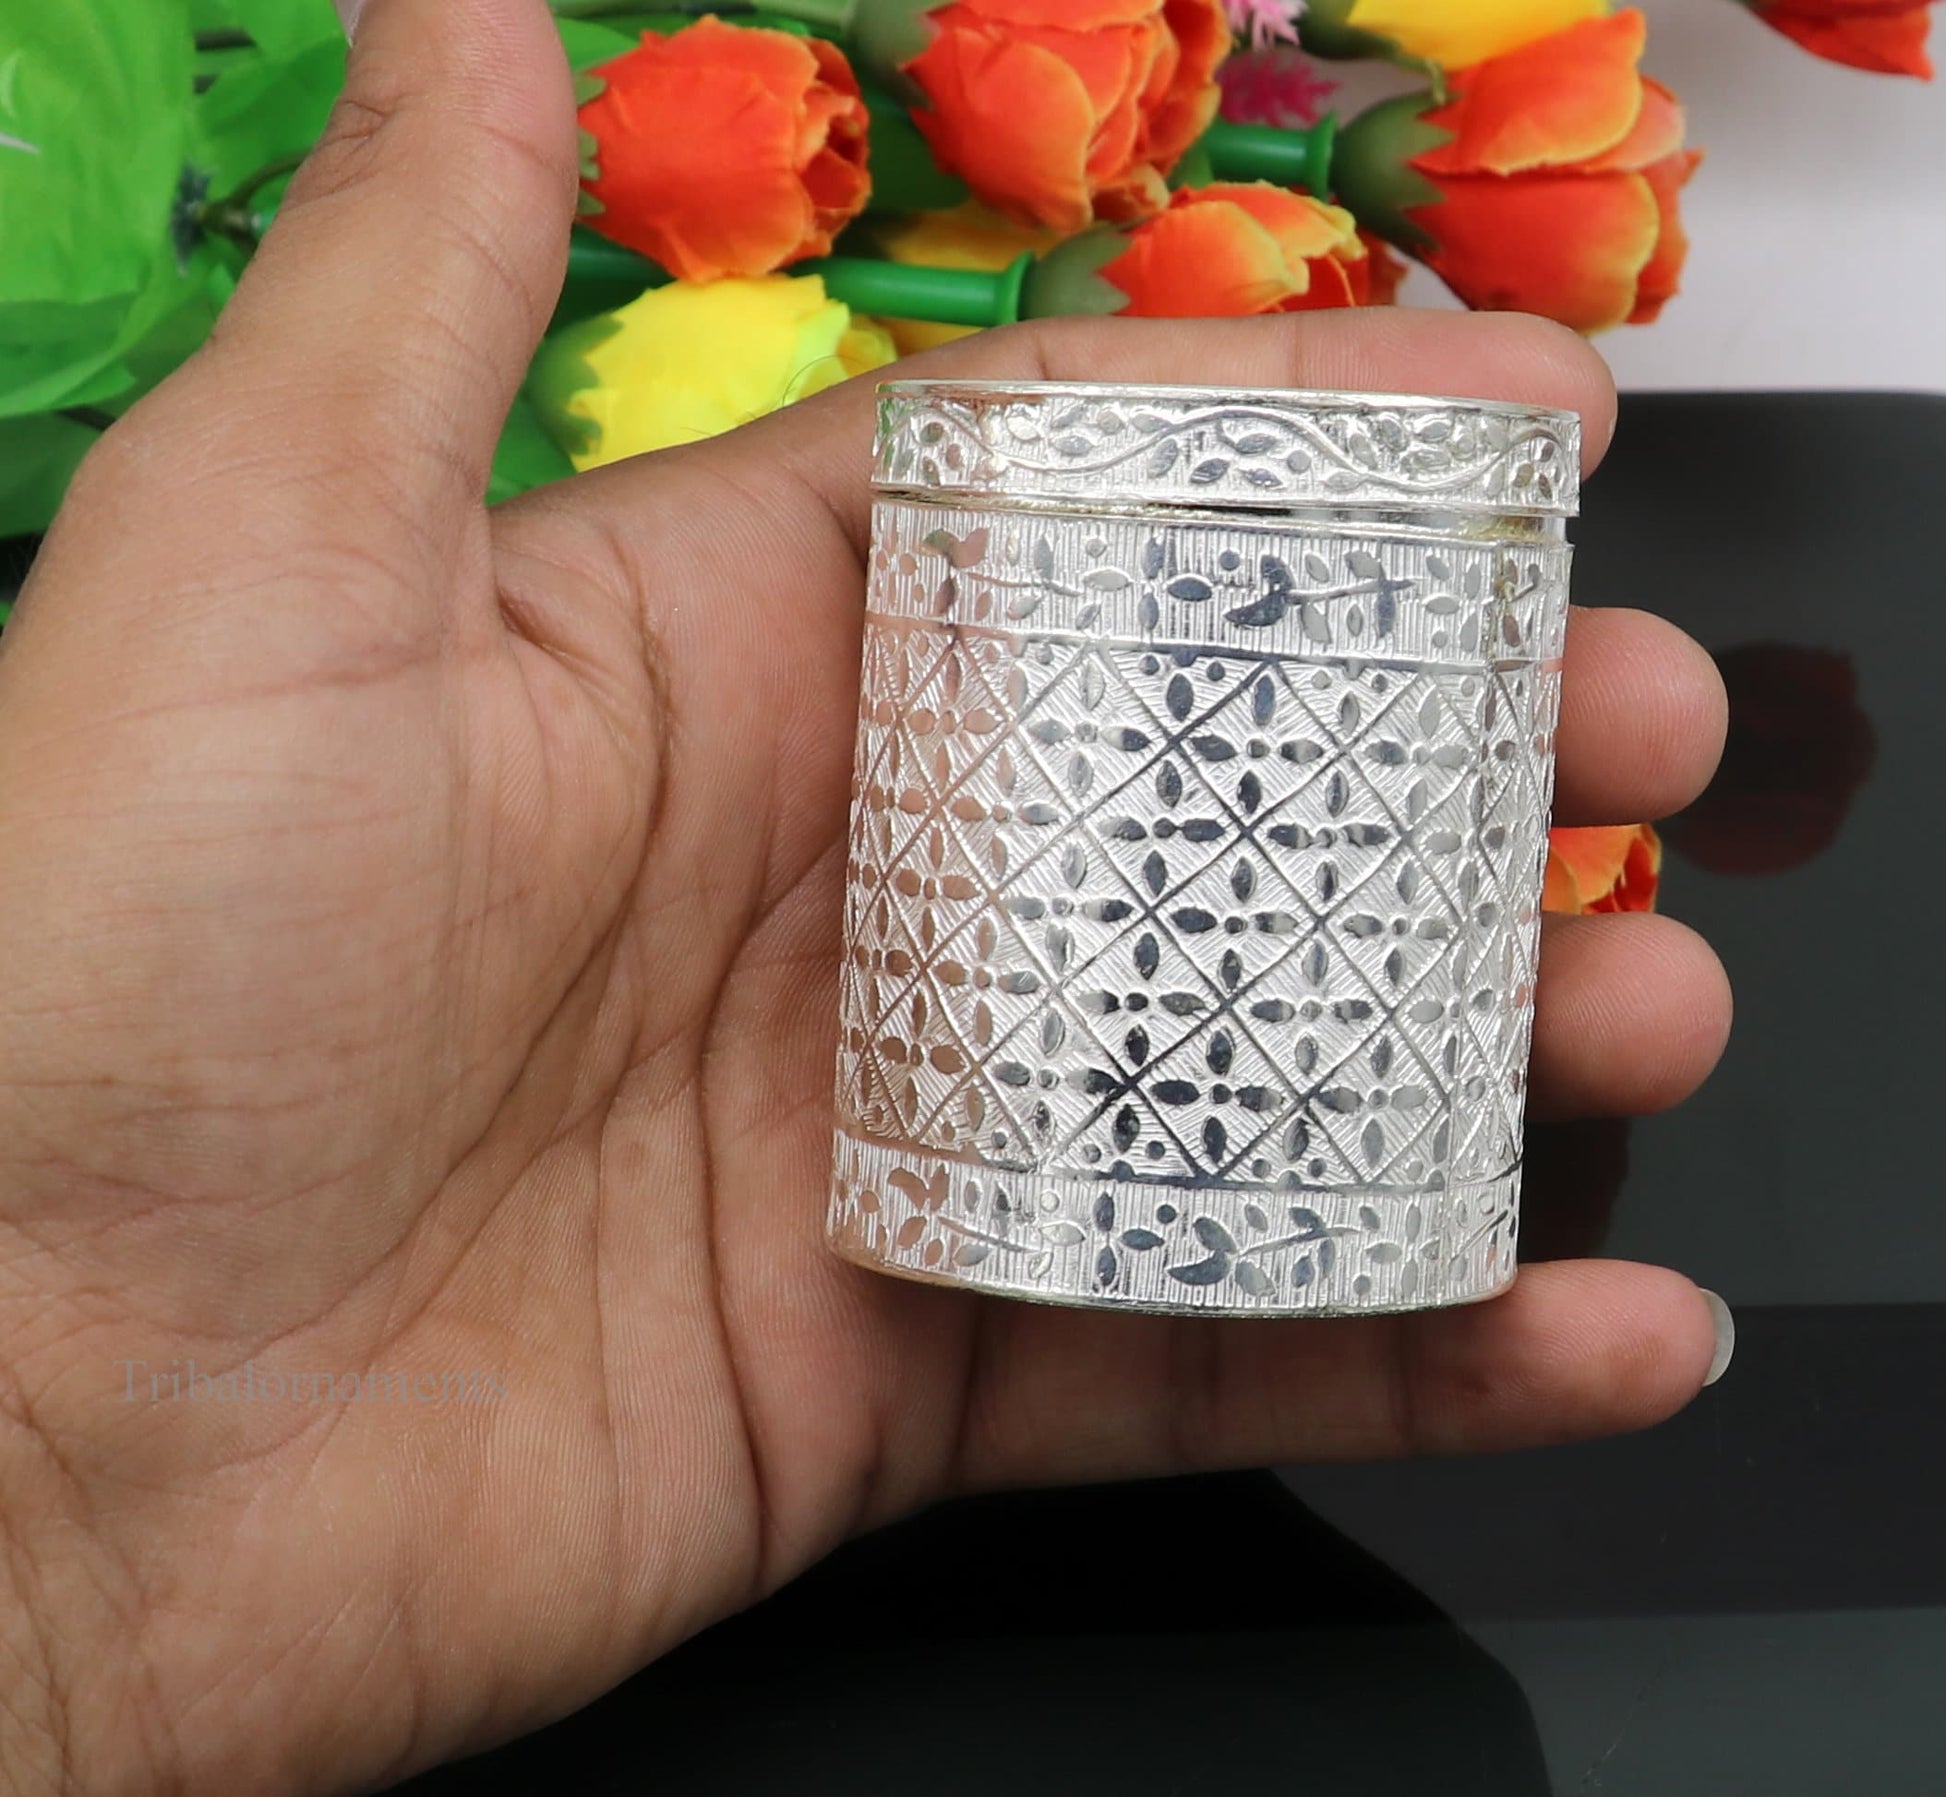 2.5" 925 solid silver utensils vintage style trinket box, container/casket box bridal floral work box, jewelry box silver utensils stb202 - TRIBAL ORNAMENTS